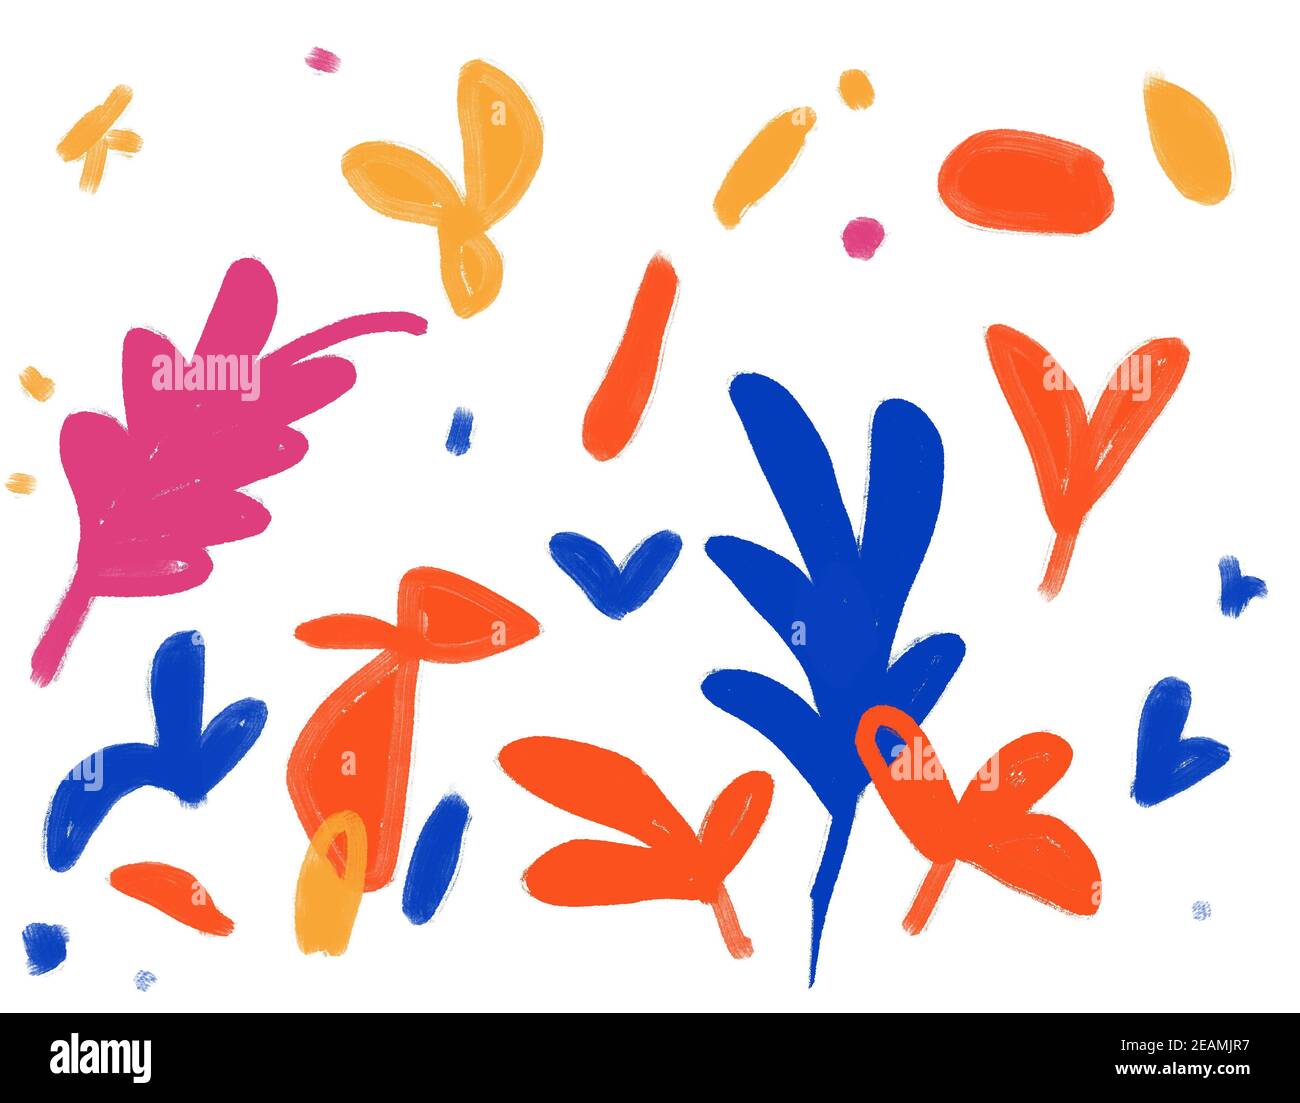 Flower matisse Cut Out Stock Images & Pictures - Alamy